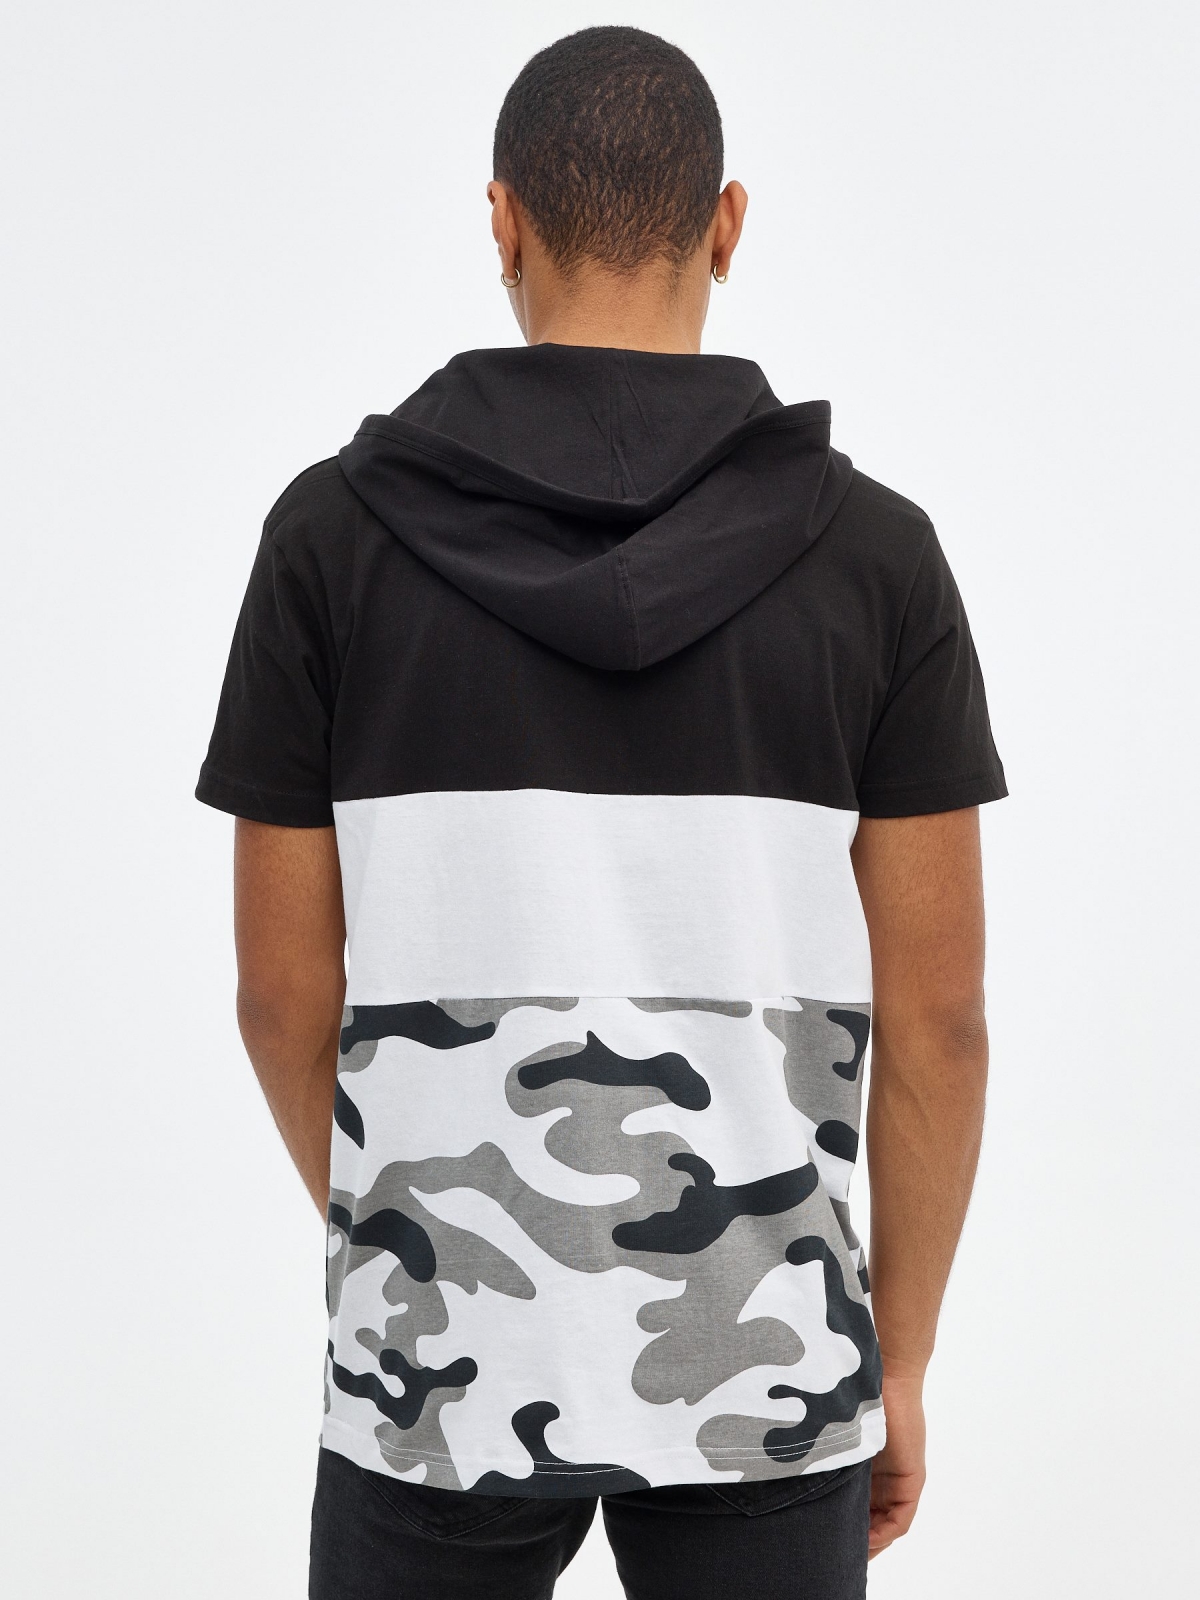 Camouflage print hooded t-shirt black middle back view